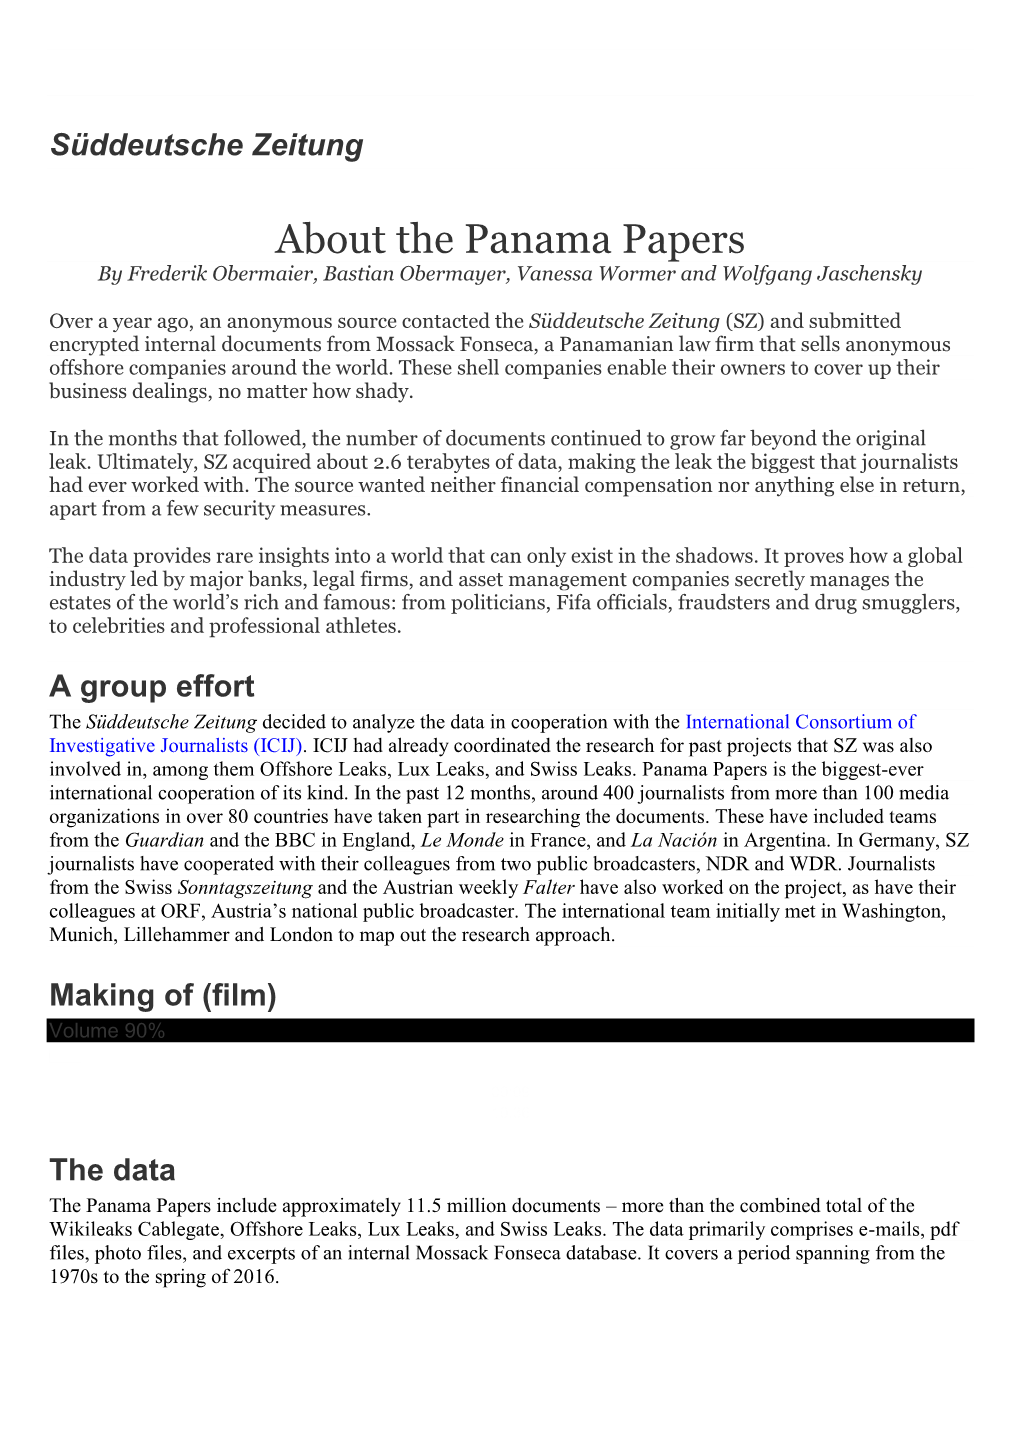 About the Panama Papers by Frederik Obermaier, Bastian Obermayer, Vanessa Wormer and Wolfgang Jaschensky